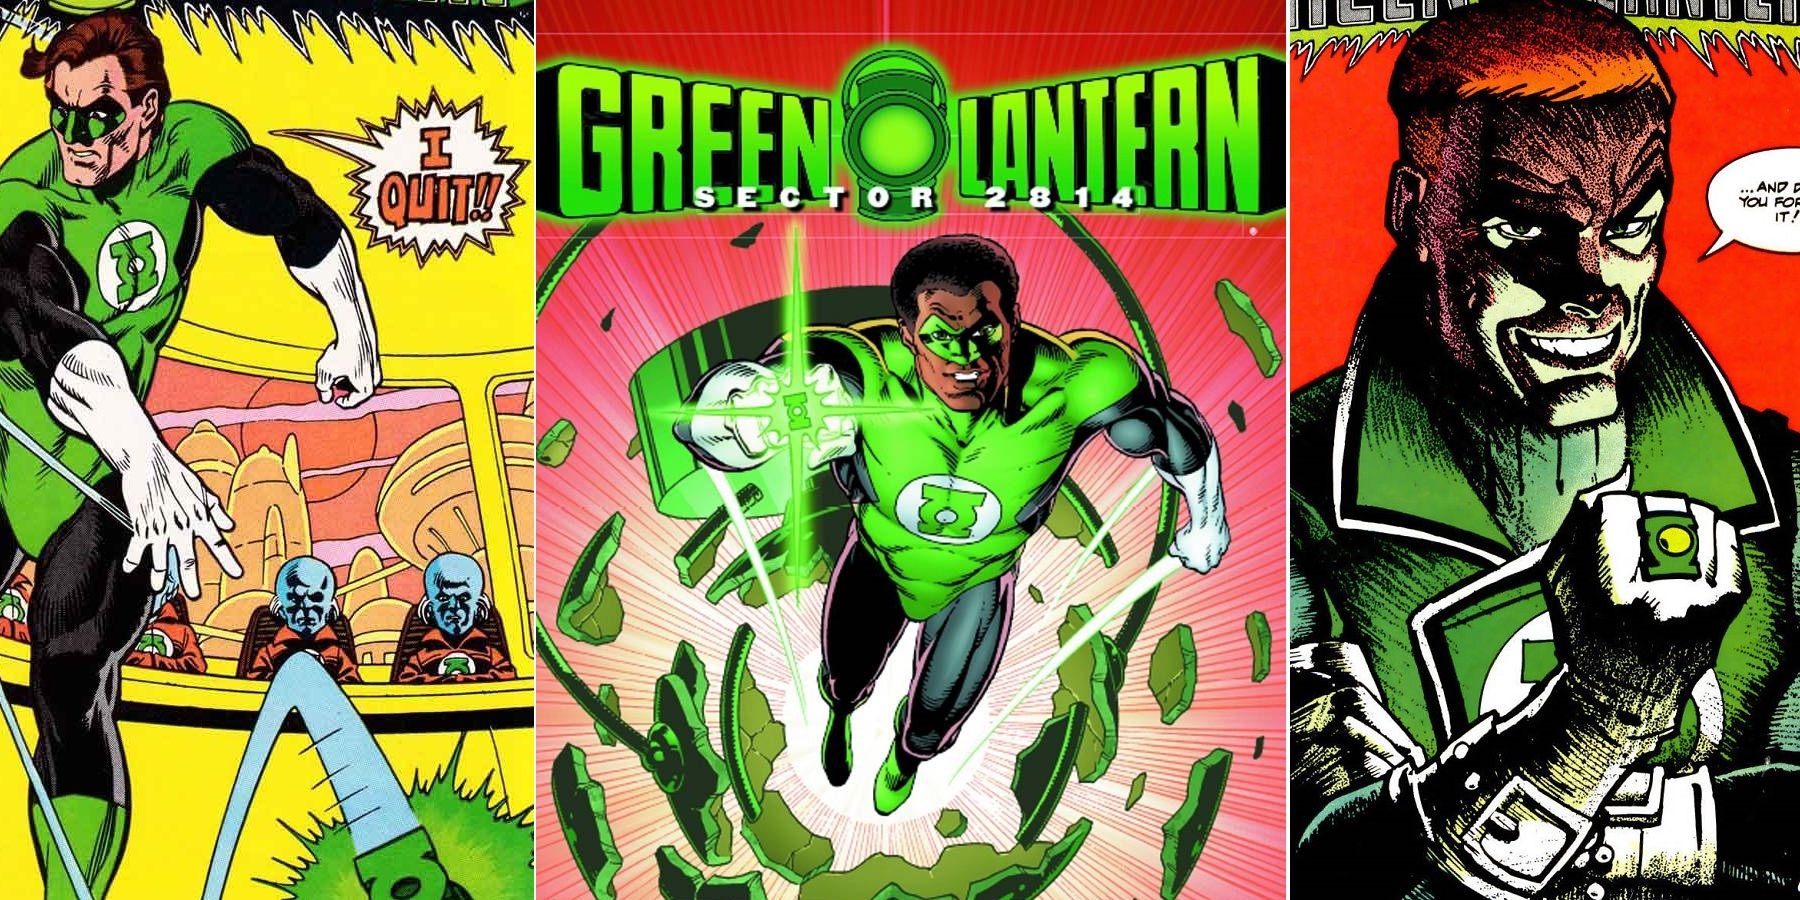 Green Lanterns of the '80s, by Dave Gibbons and Howard Chaykin